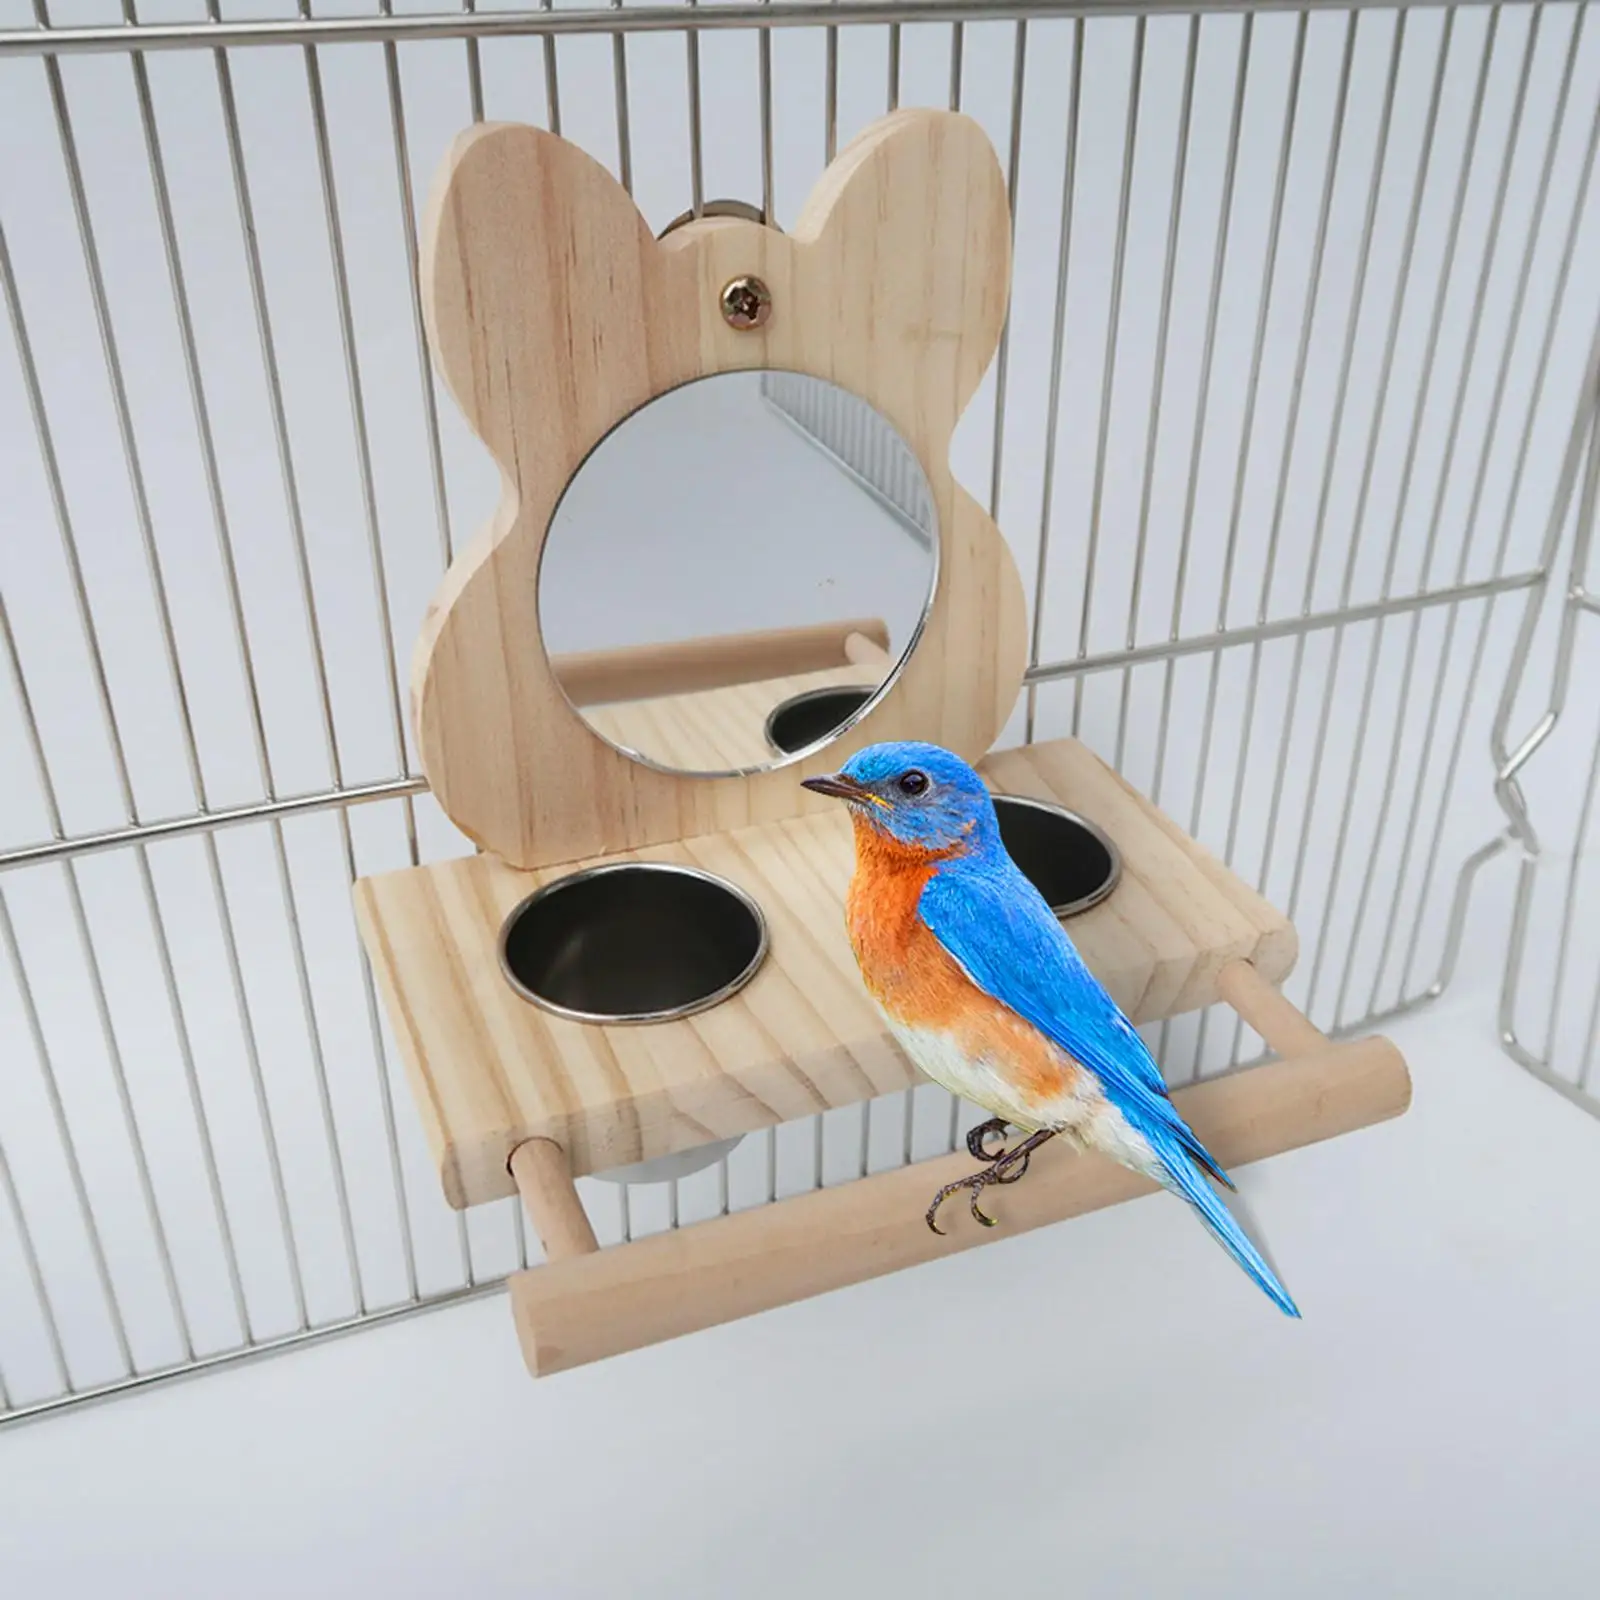 Parrots Mirror Feeder Cups Wooden Frames Wooden Perches Feeding Racks Dish Wooden Stands Water Bowl for Budgie Finch Toys